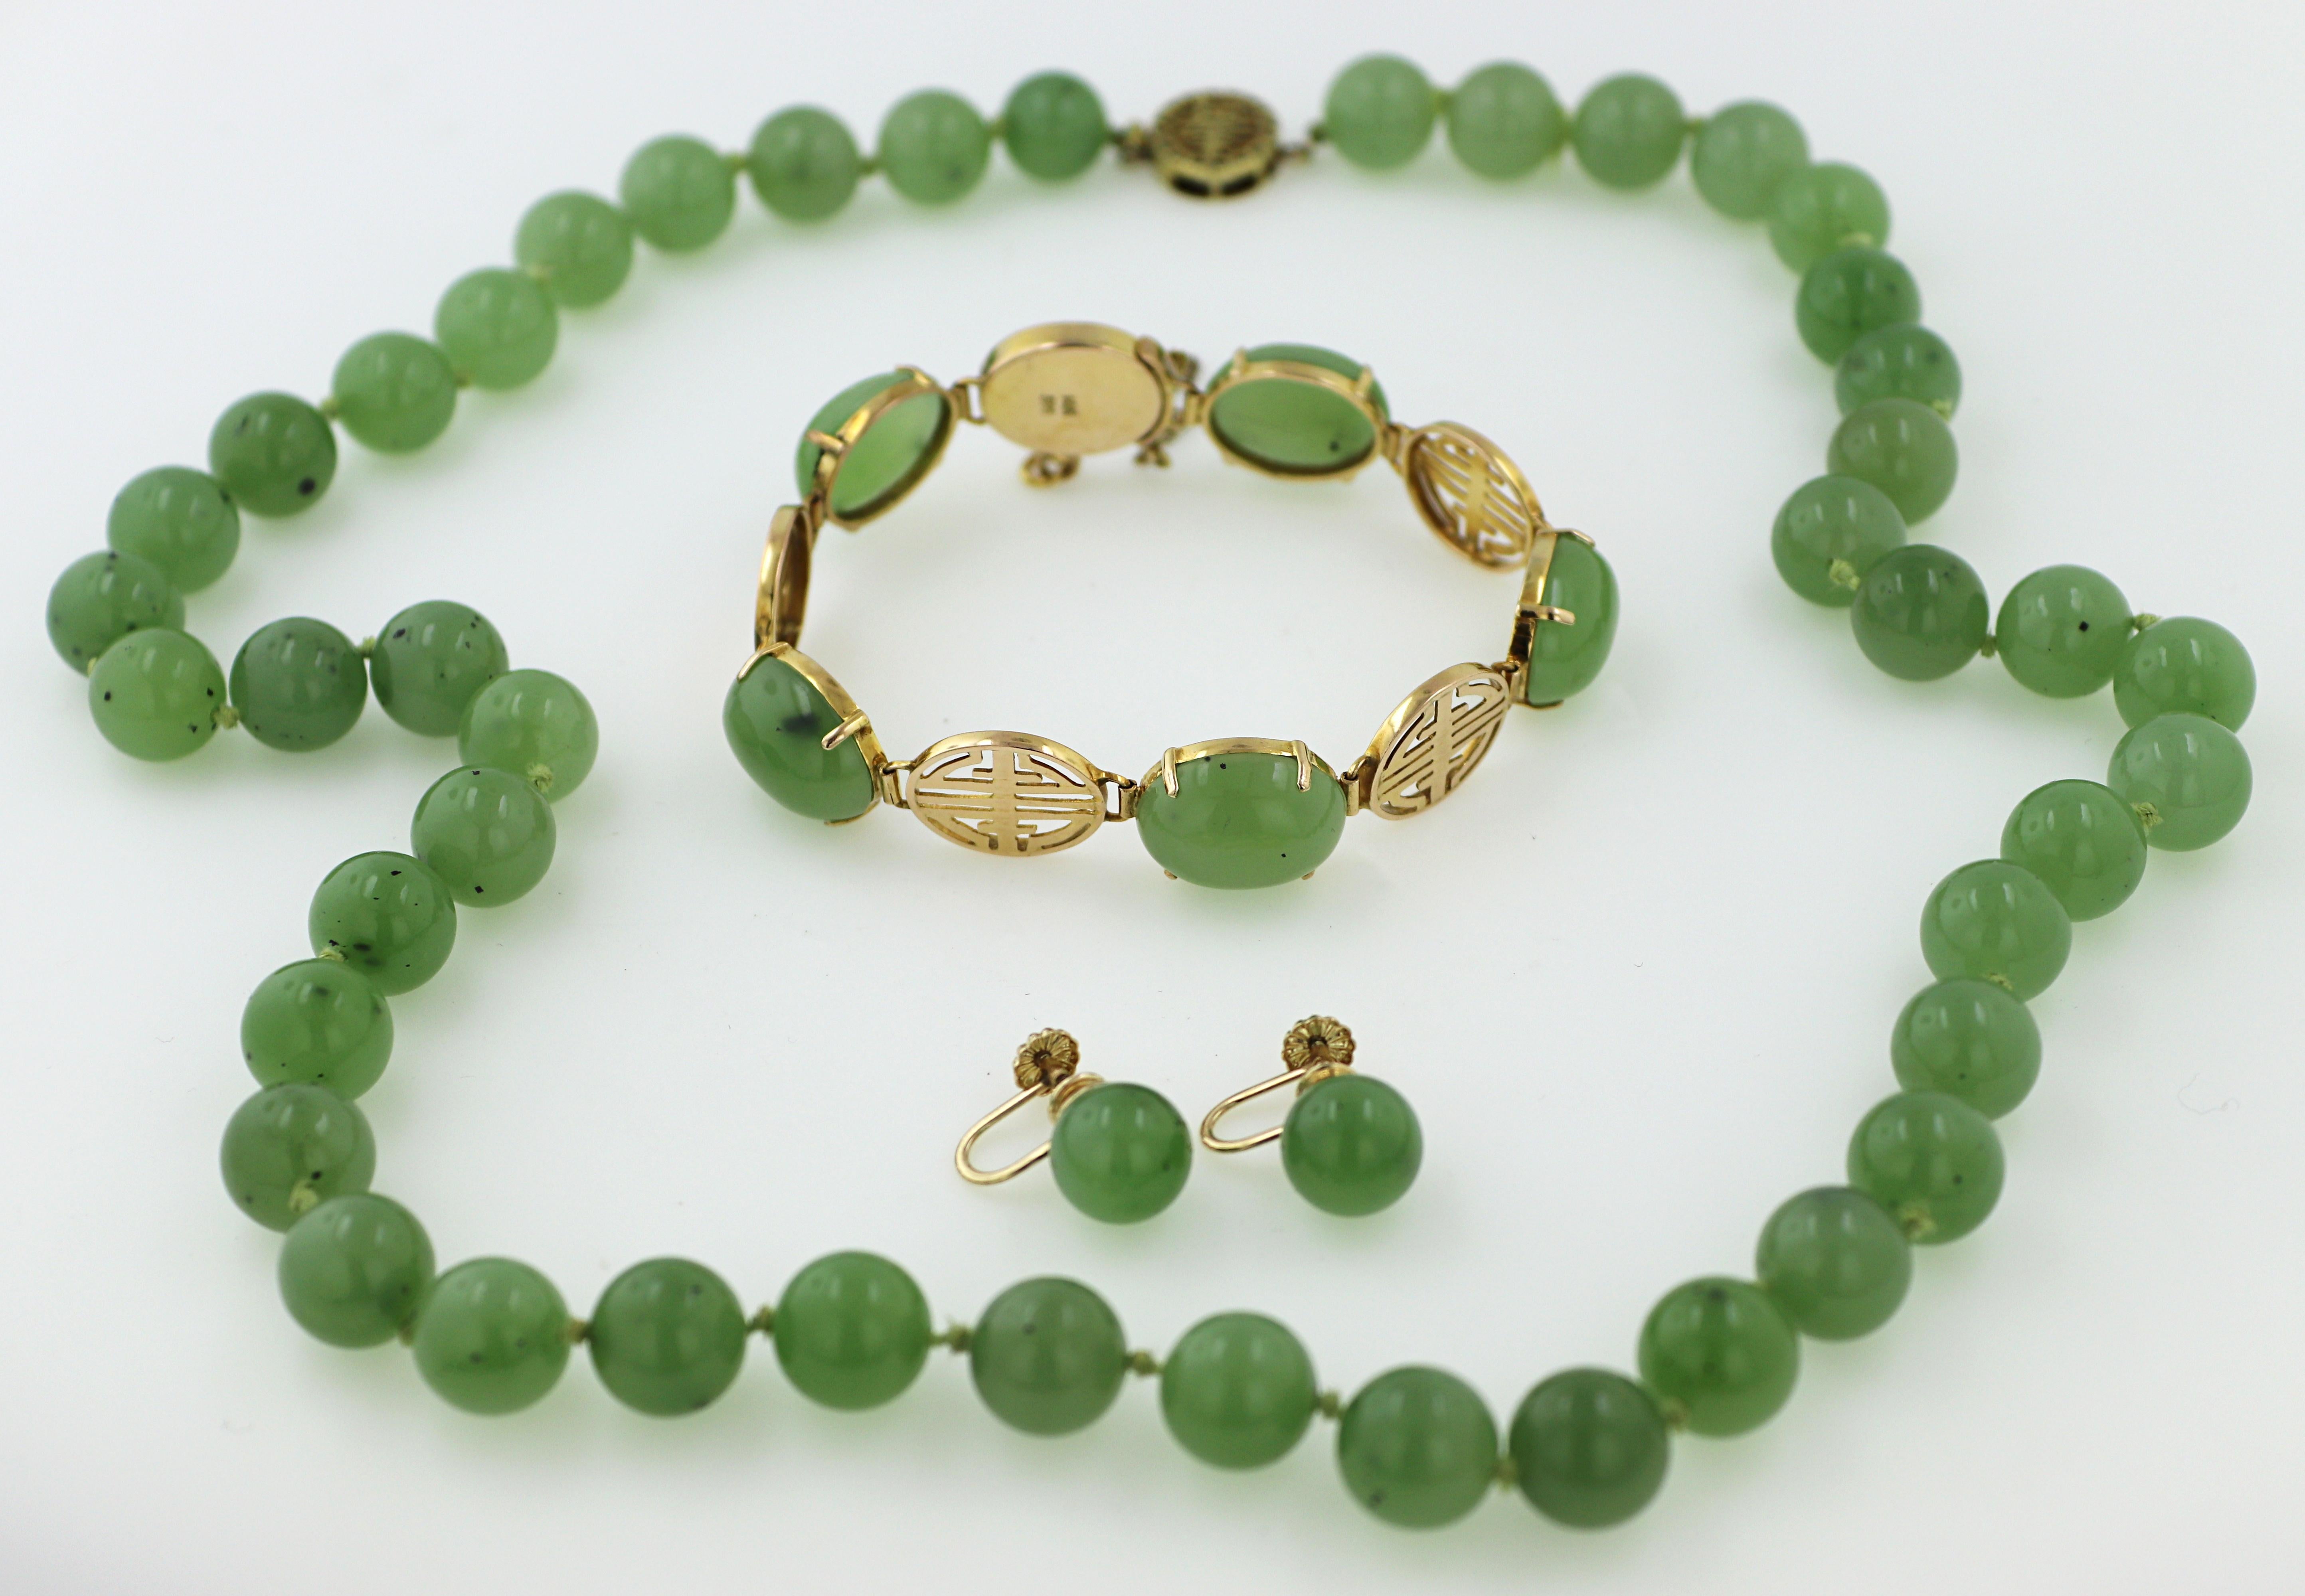 The Siberian nephrite bead necklace is composed of (45) 10 mm nephrite beads, completed by a 14k
yellow gold round “health” clasp, forming a knotted 23-inch necklace, accompanied by a matching
bracelet with (5) Siberian nephrite cabochons, 16 X 11